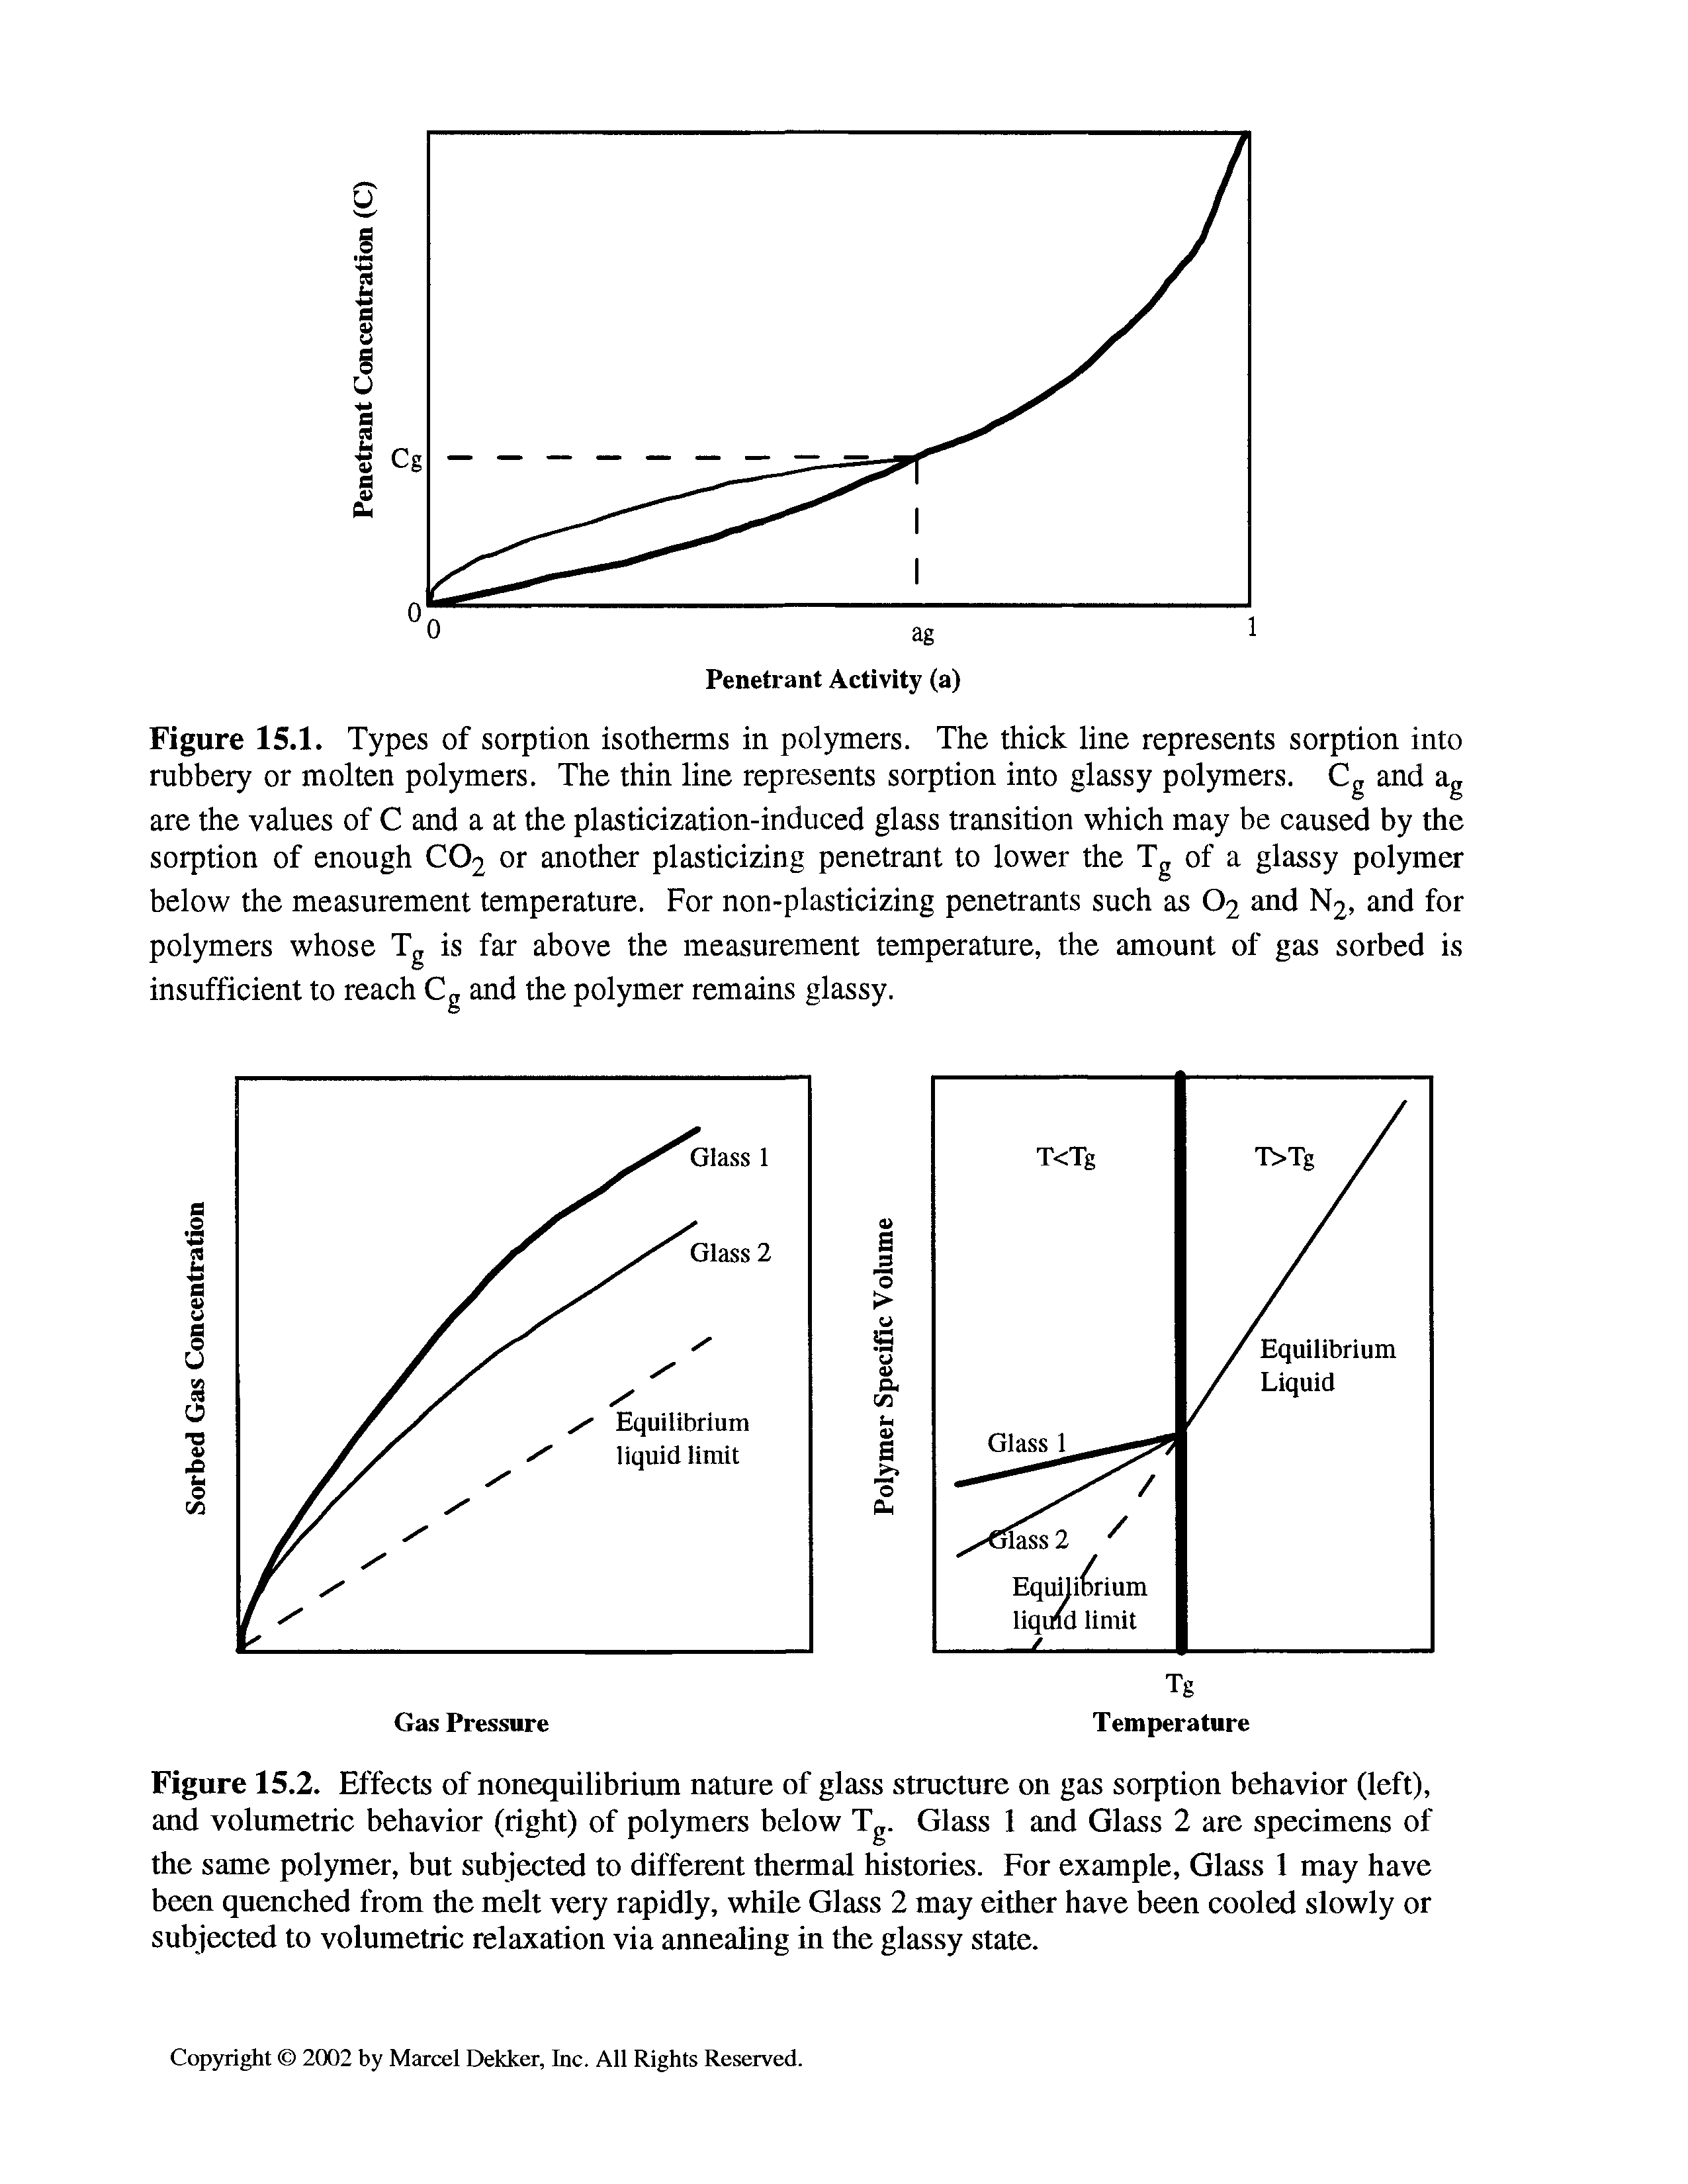 Figure 15.2. Effects of nonequilibrium nature of glass structure on gas sorption behavior (left), and volumetric behavior (right) of polymers below Tg. Glass 1 and Glass 2 are specimens of the same polymer, but subjected to different thermal histories. For example, Glass 1 may have been quenched from the melt very rapidly, while Glass 2 may either have been cooled slowly or subjected to volumetric relaxation via annealing in the glassy state.